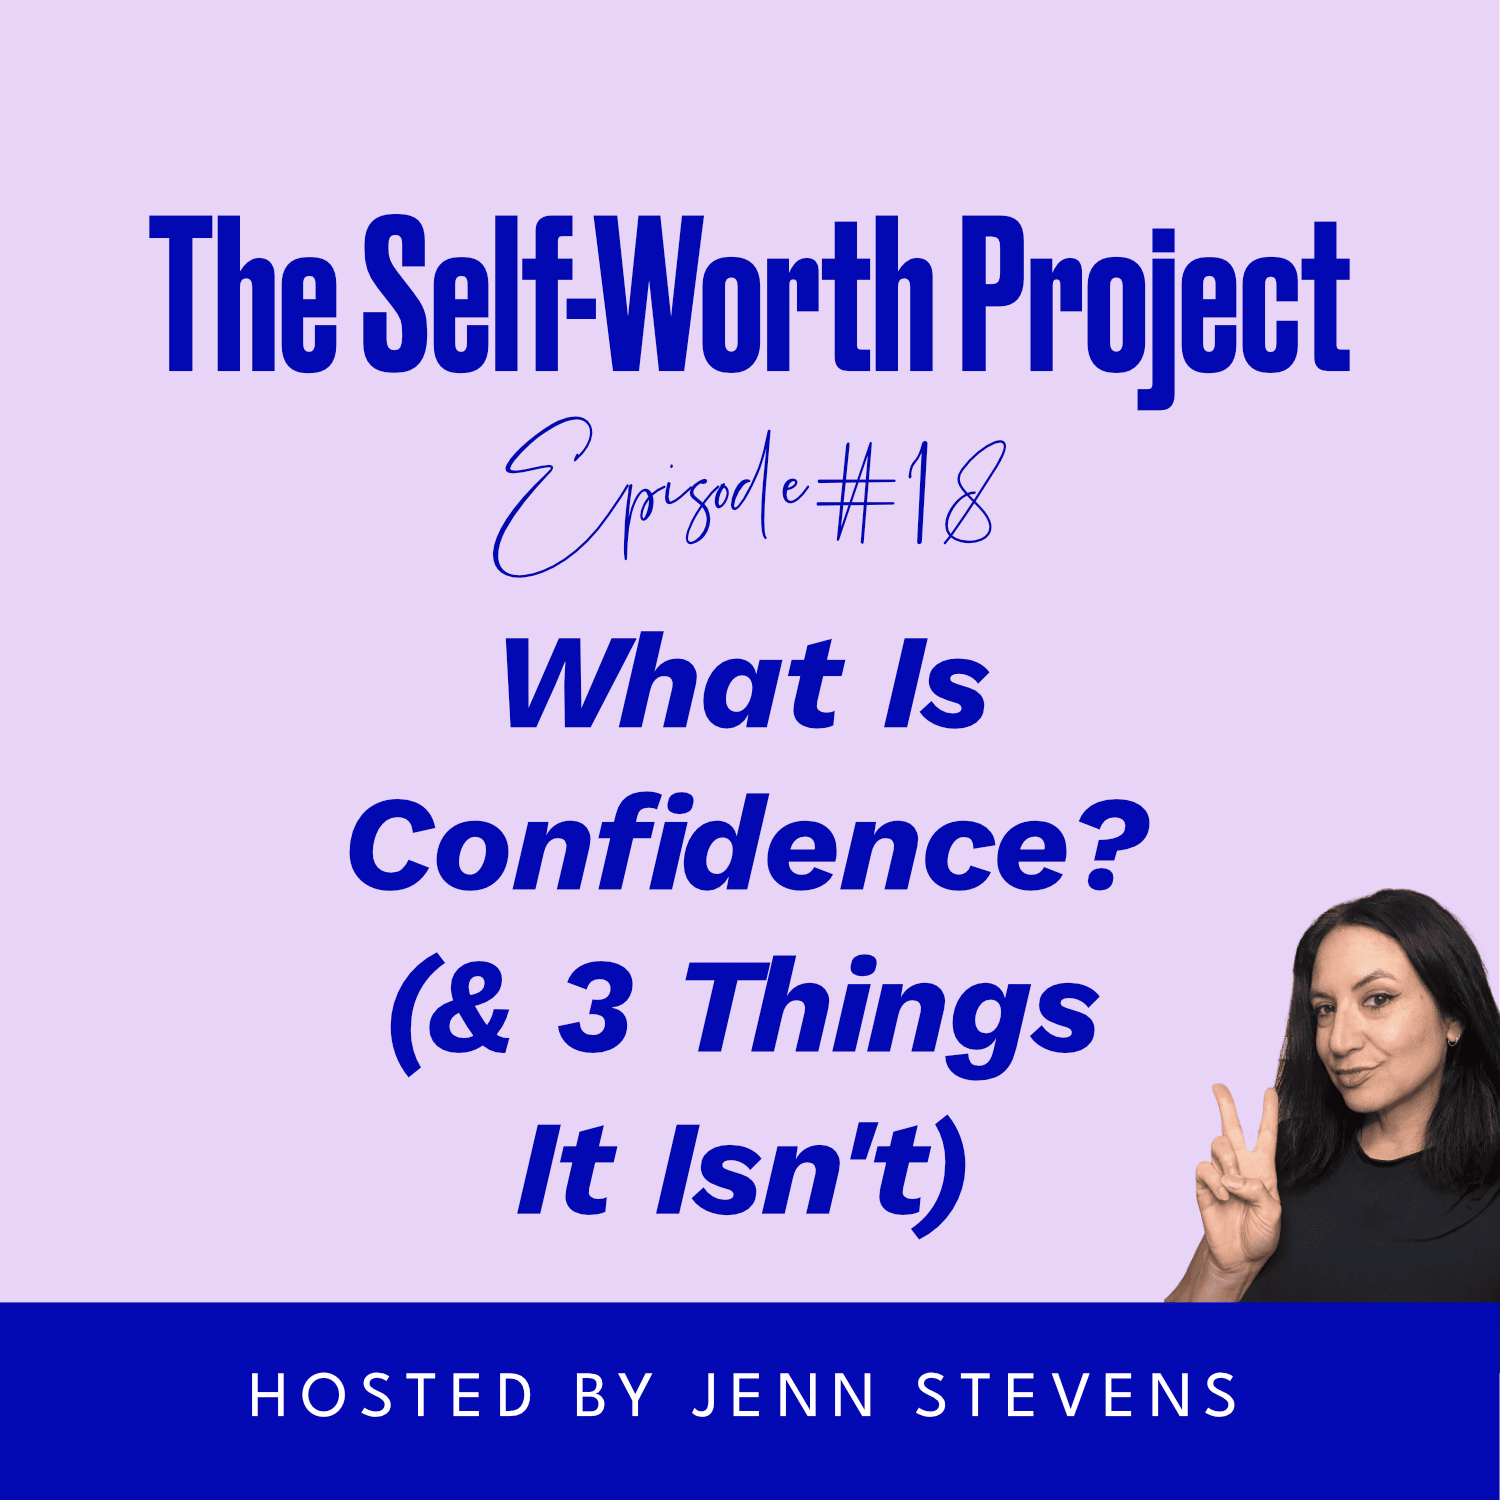 The Self-Worth Project Podcast Episode #18: What Is Confidence? (& 3 Things It Isn't)